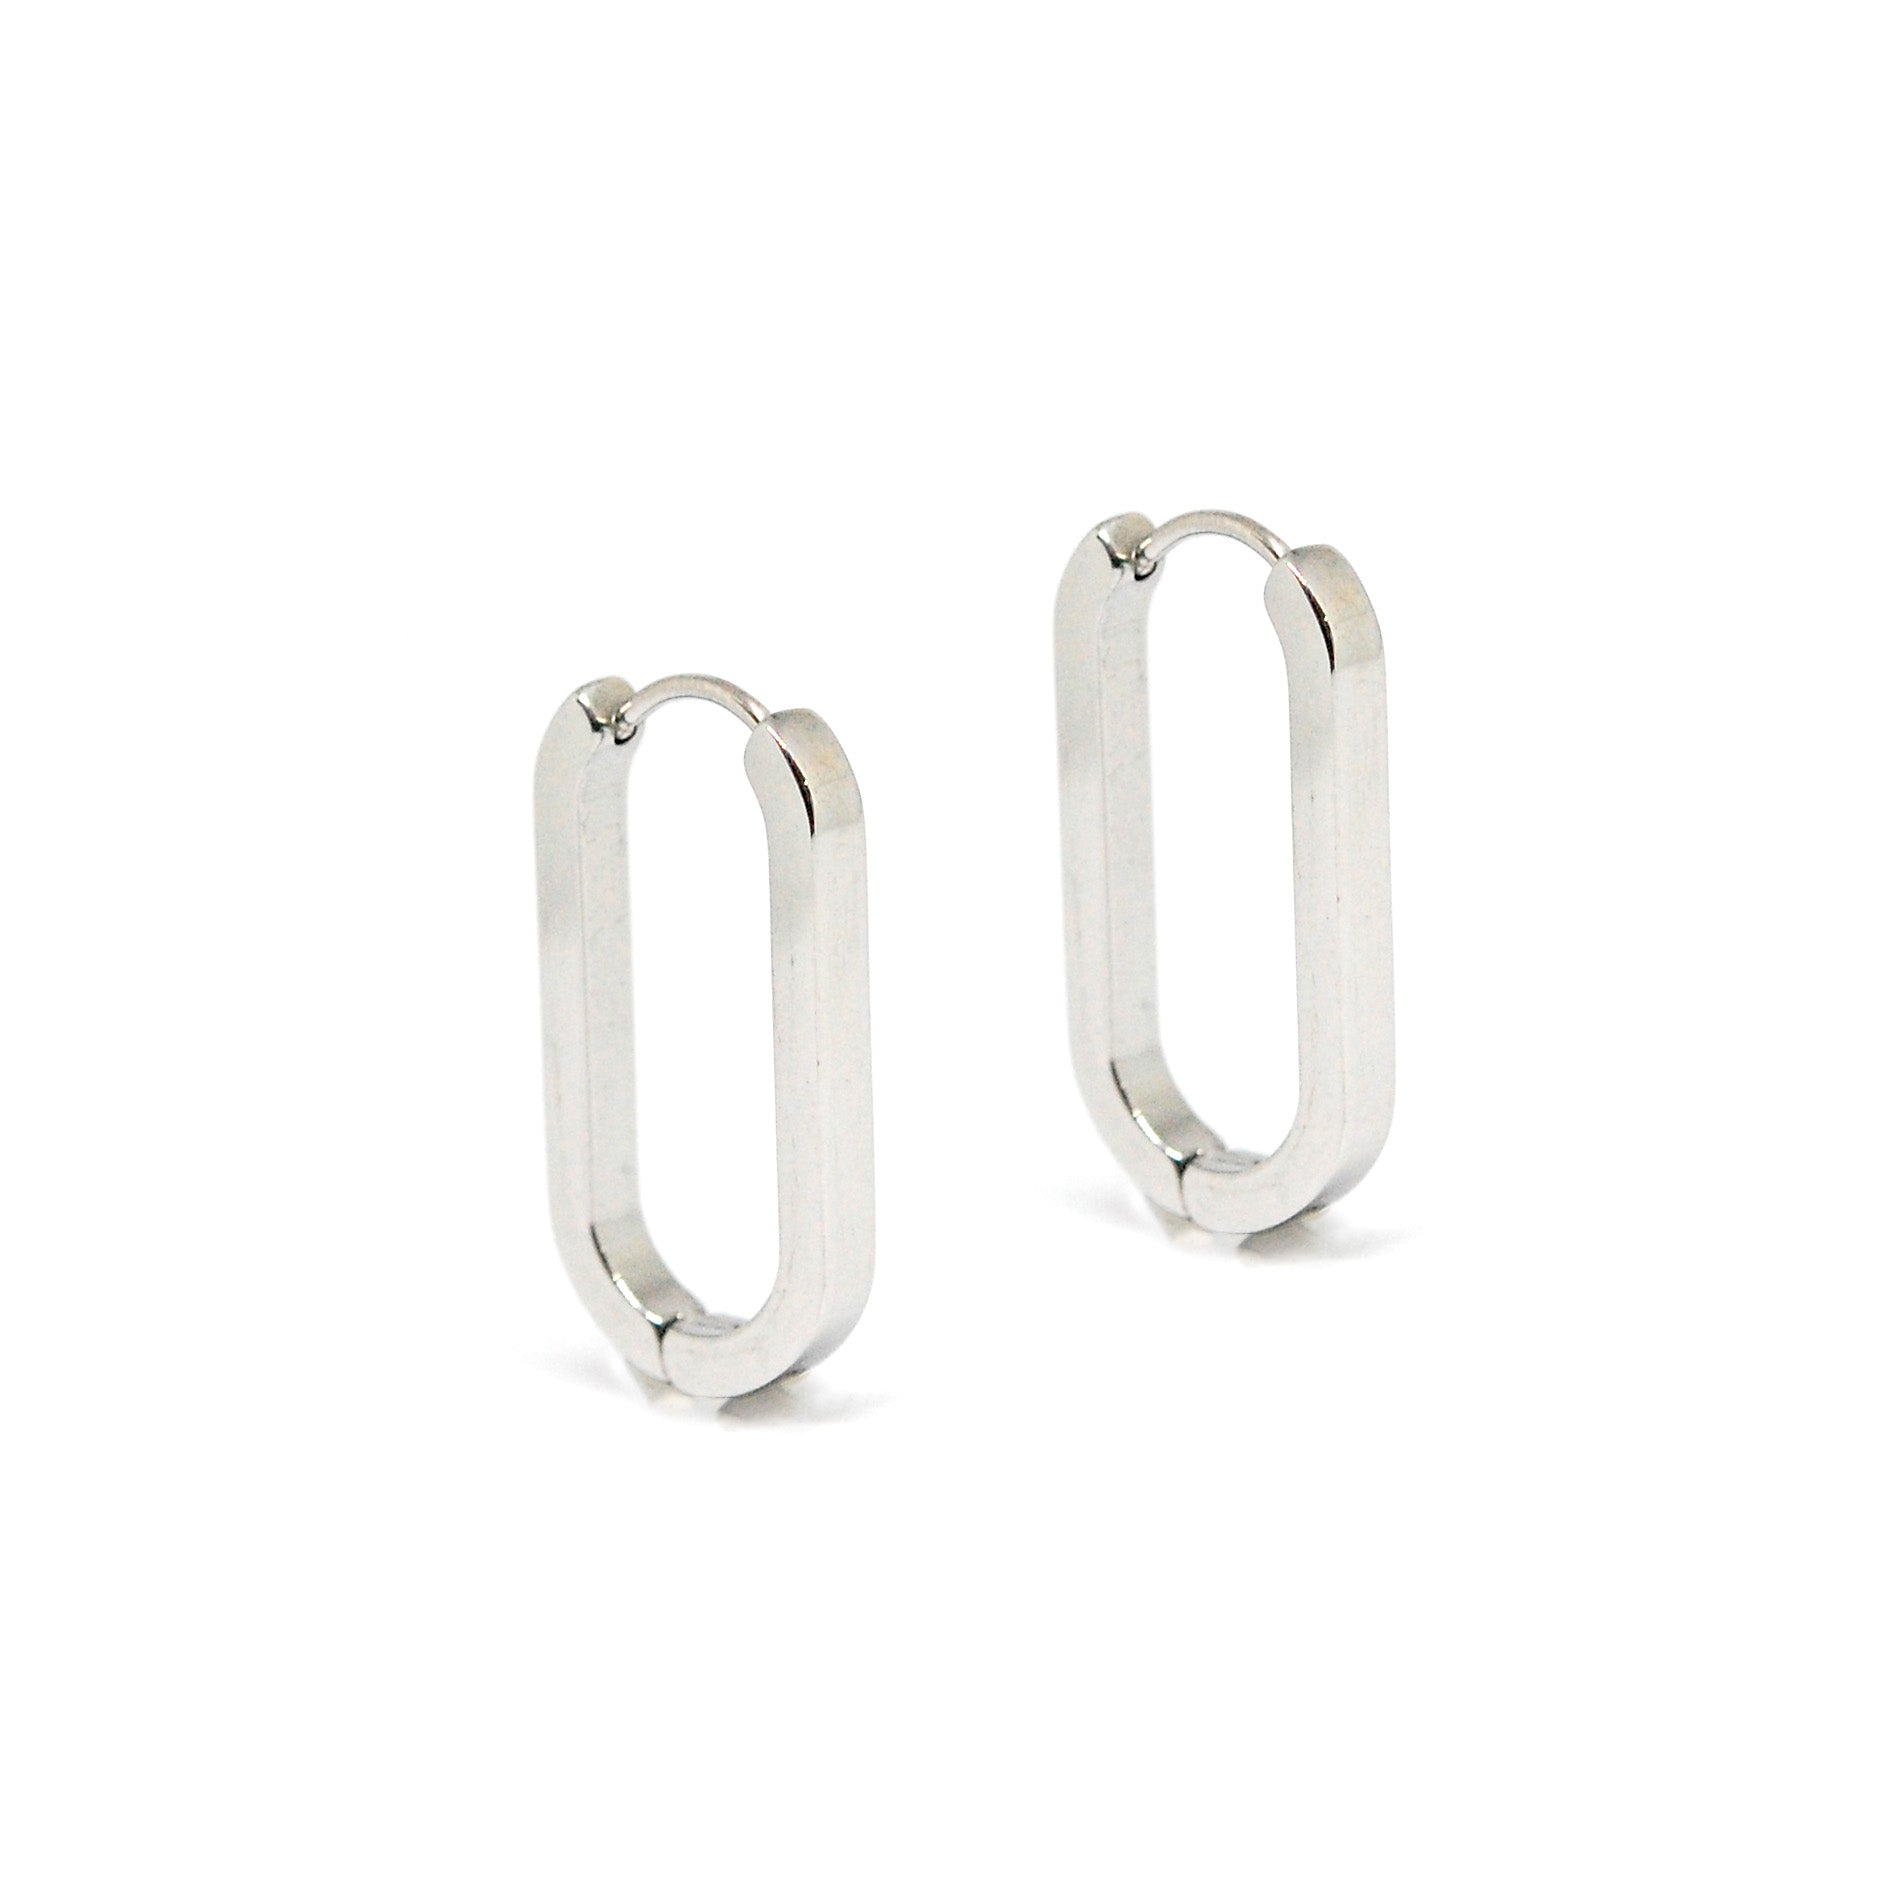 ESE 7874: Thick Glossy Long Oval Outline Creollas Earrings